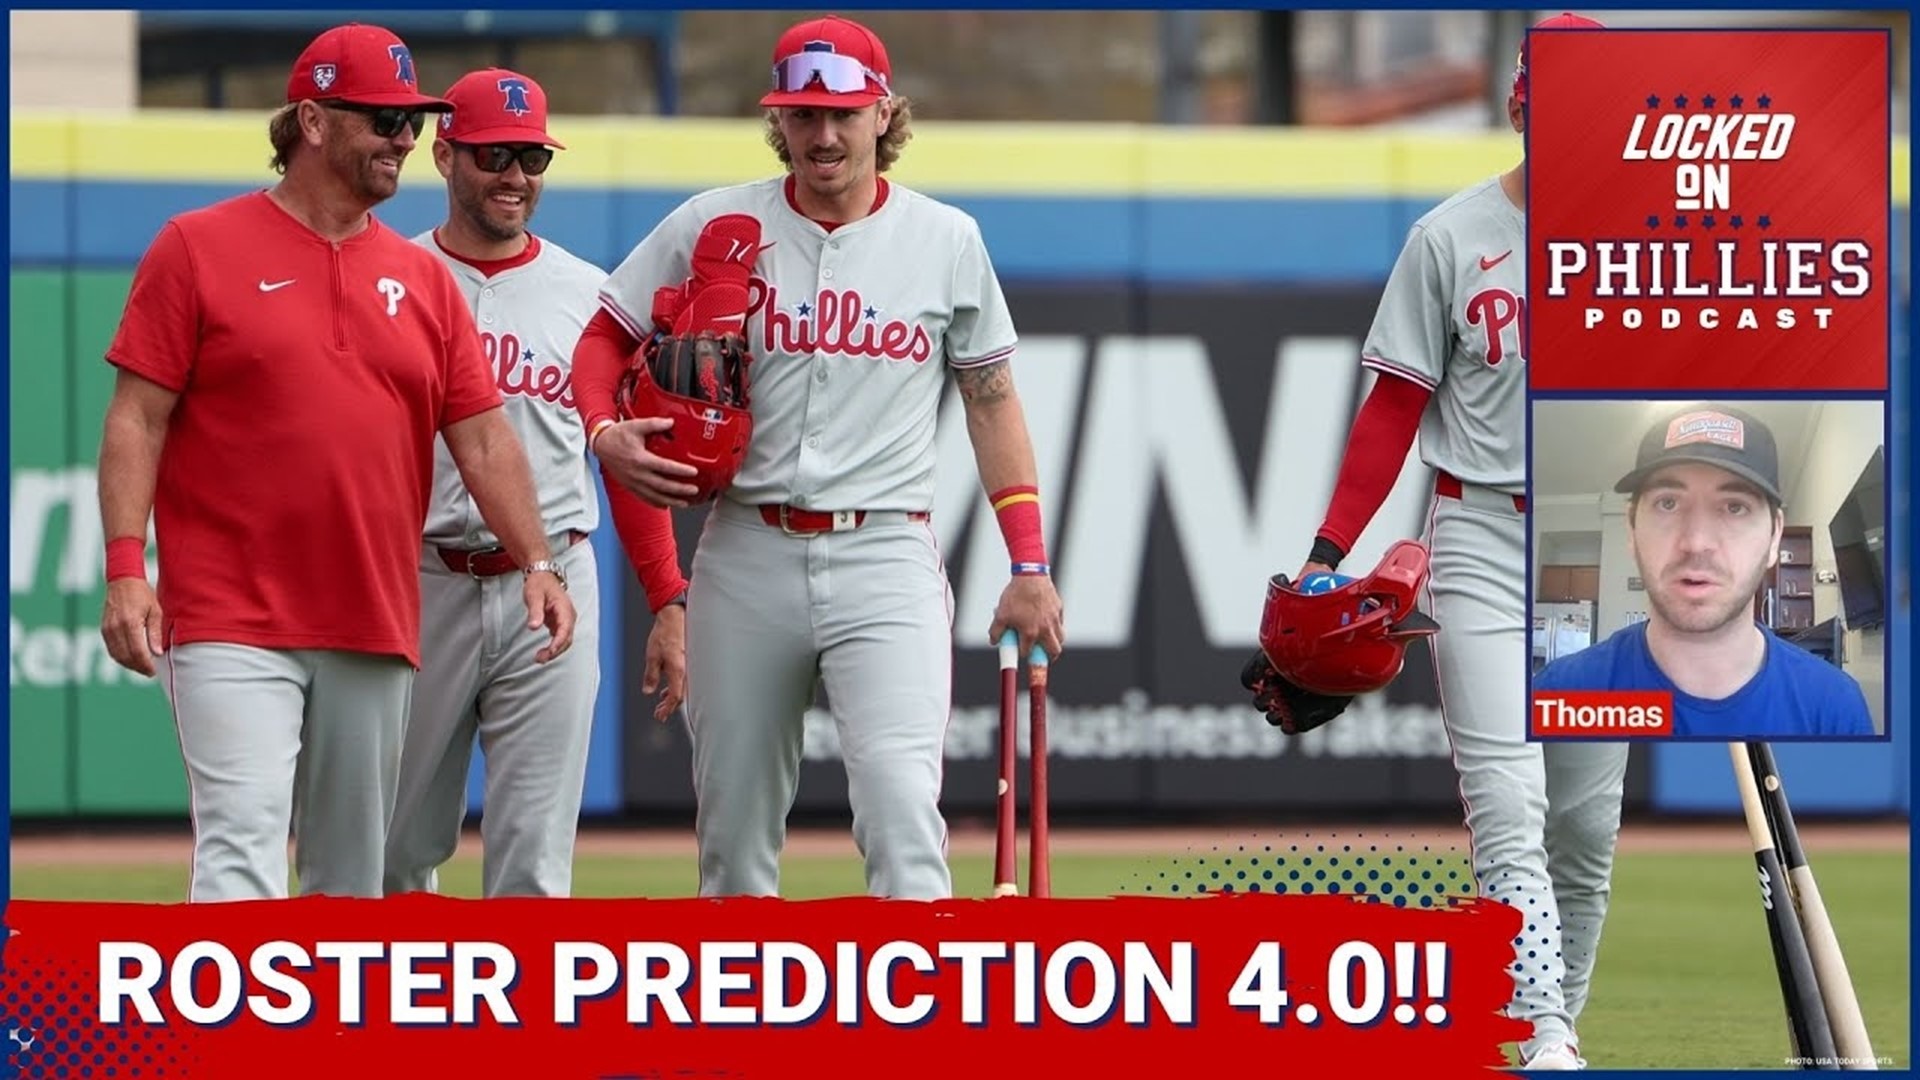 In today's episode, Connor gives his updated projection for the Philadelphia Phillies Opening Day Roster.